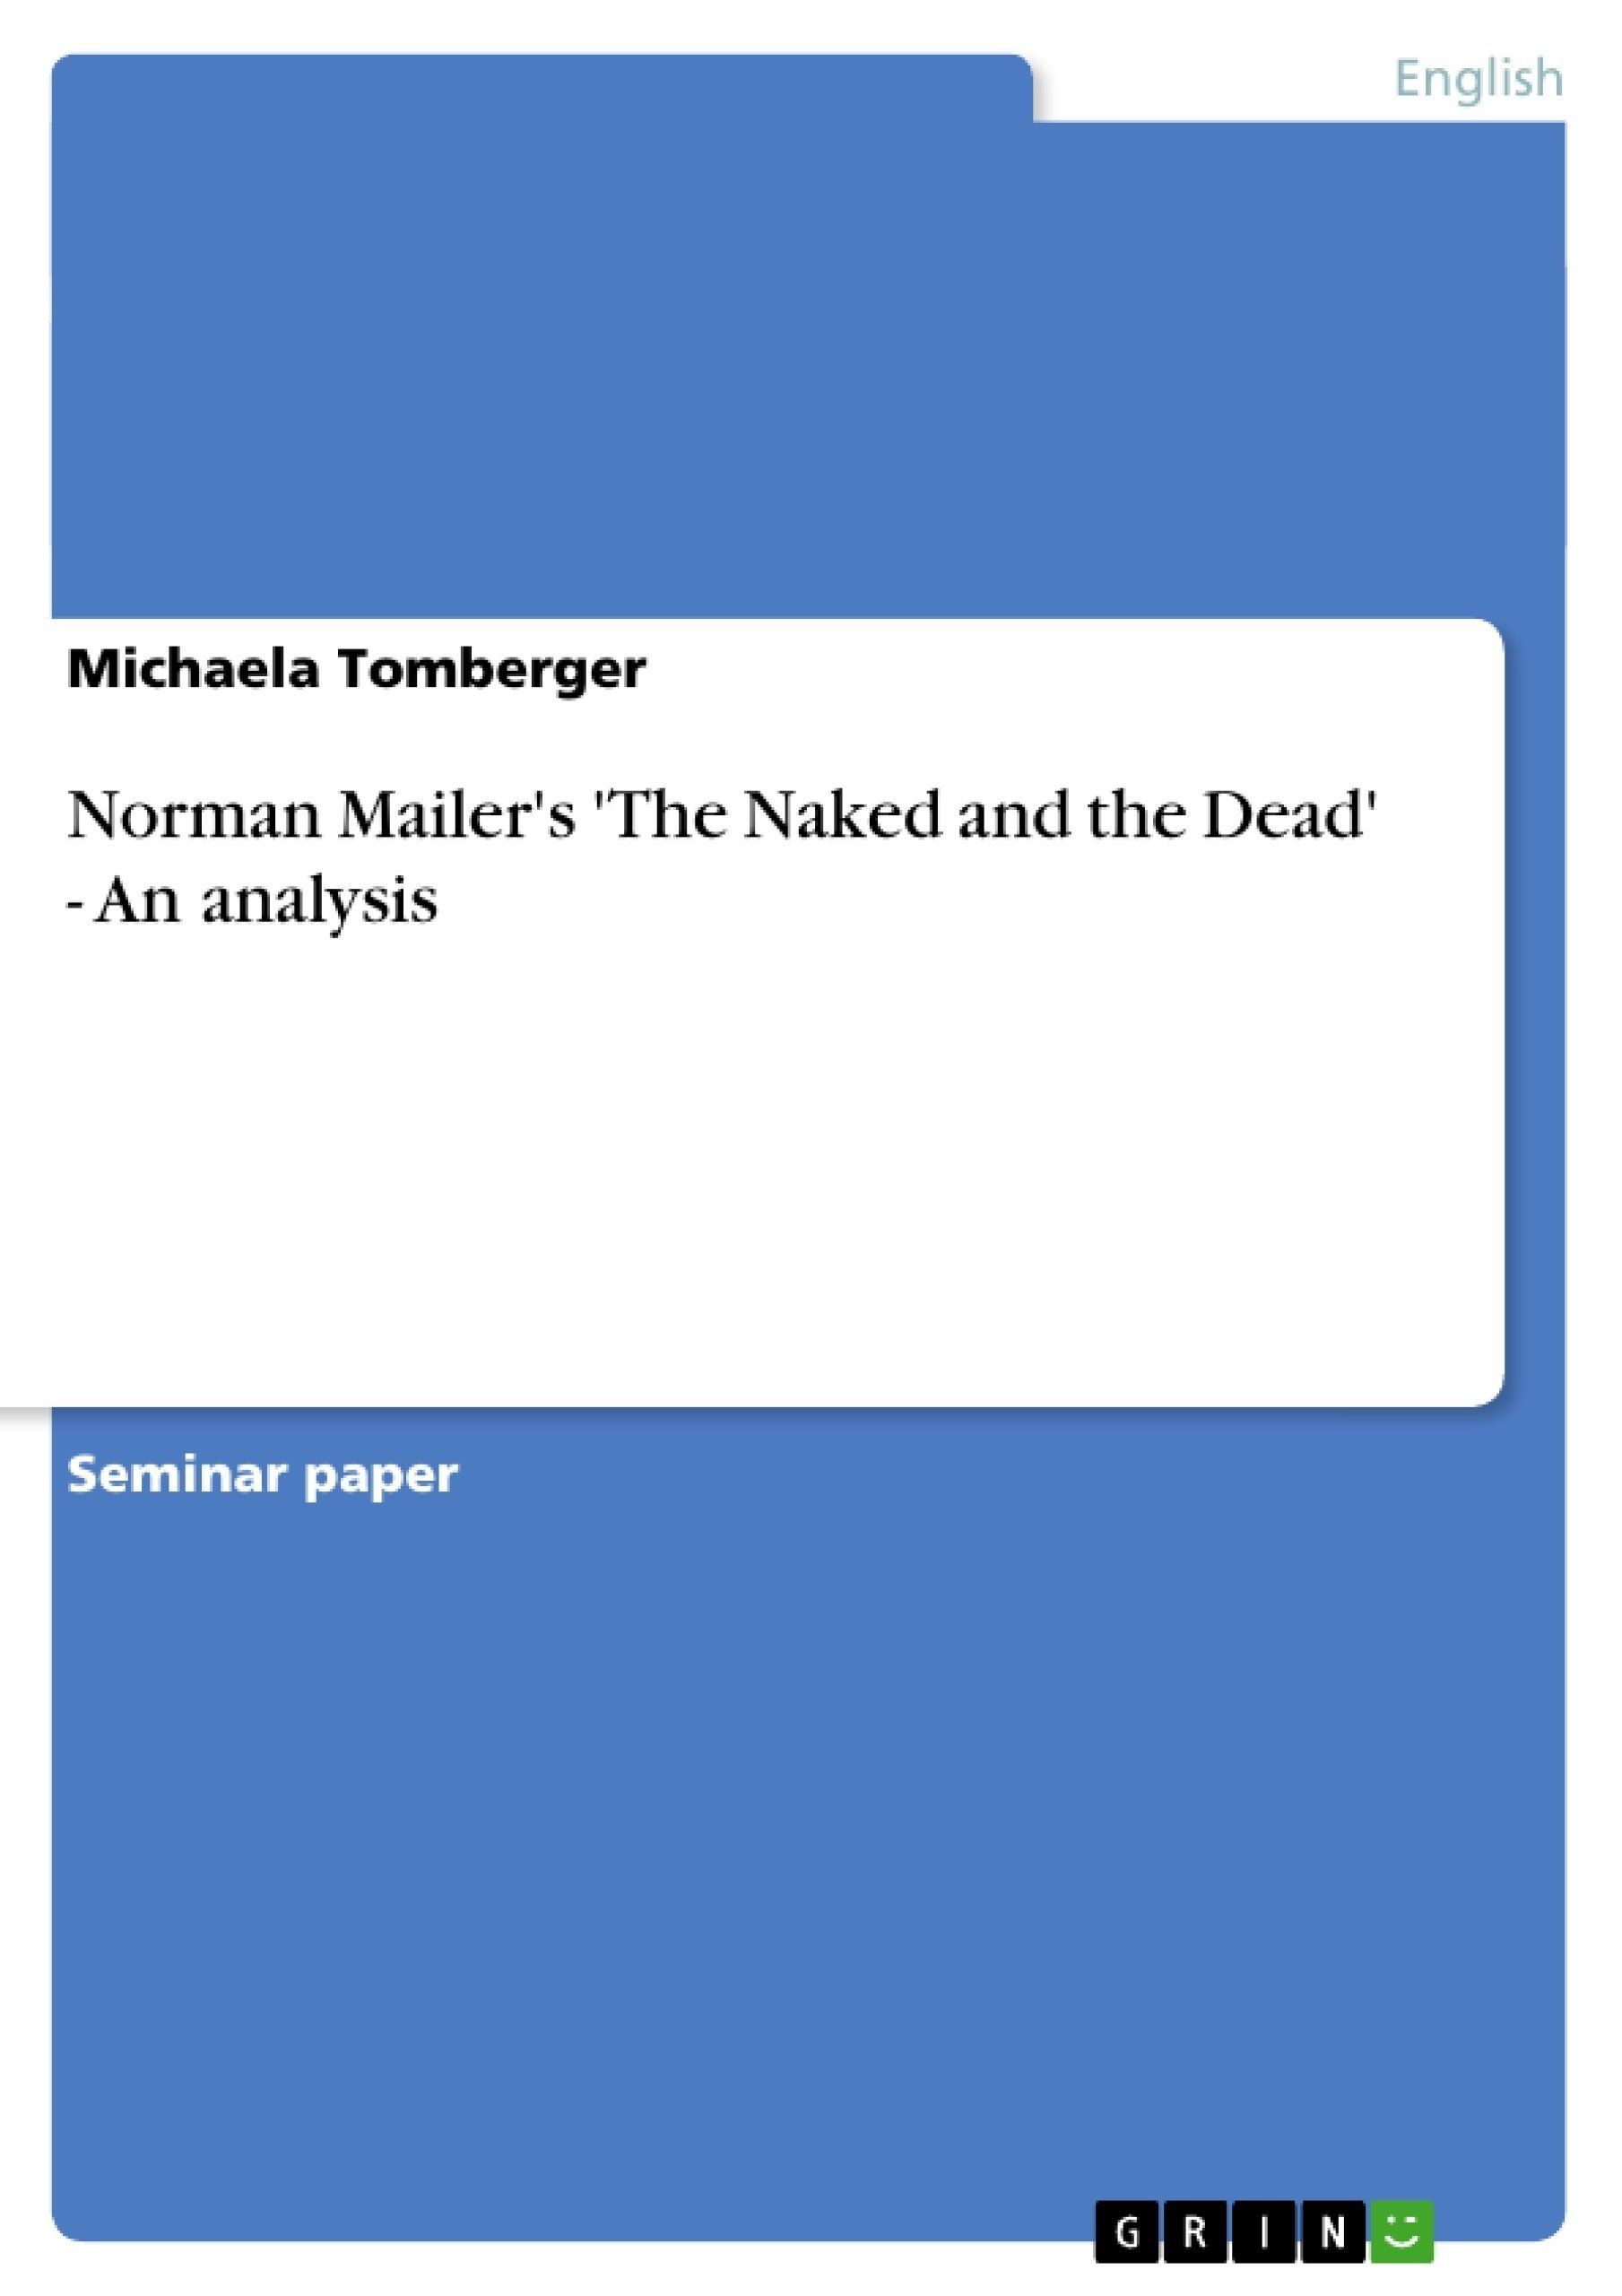 The naked and the dead miler